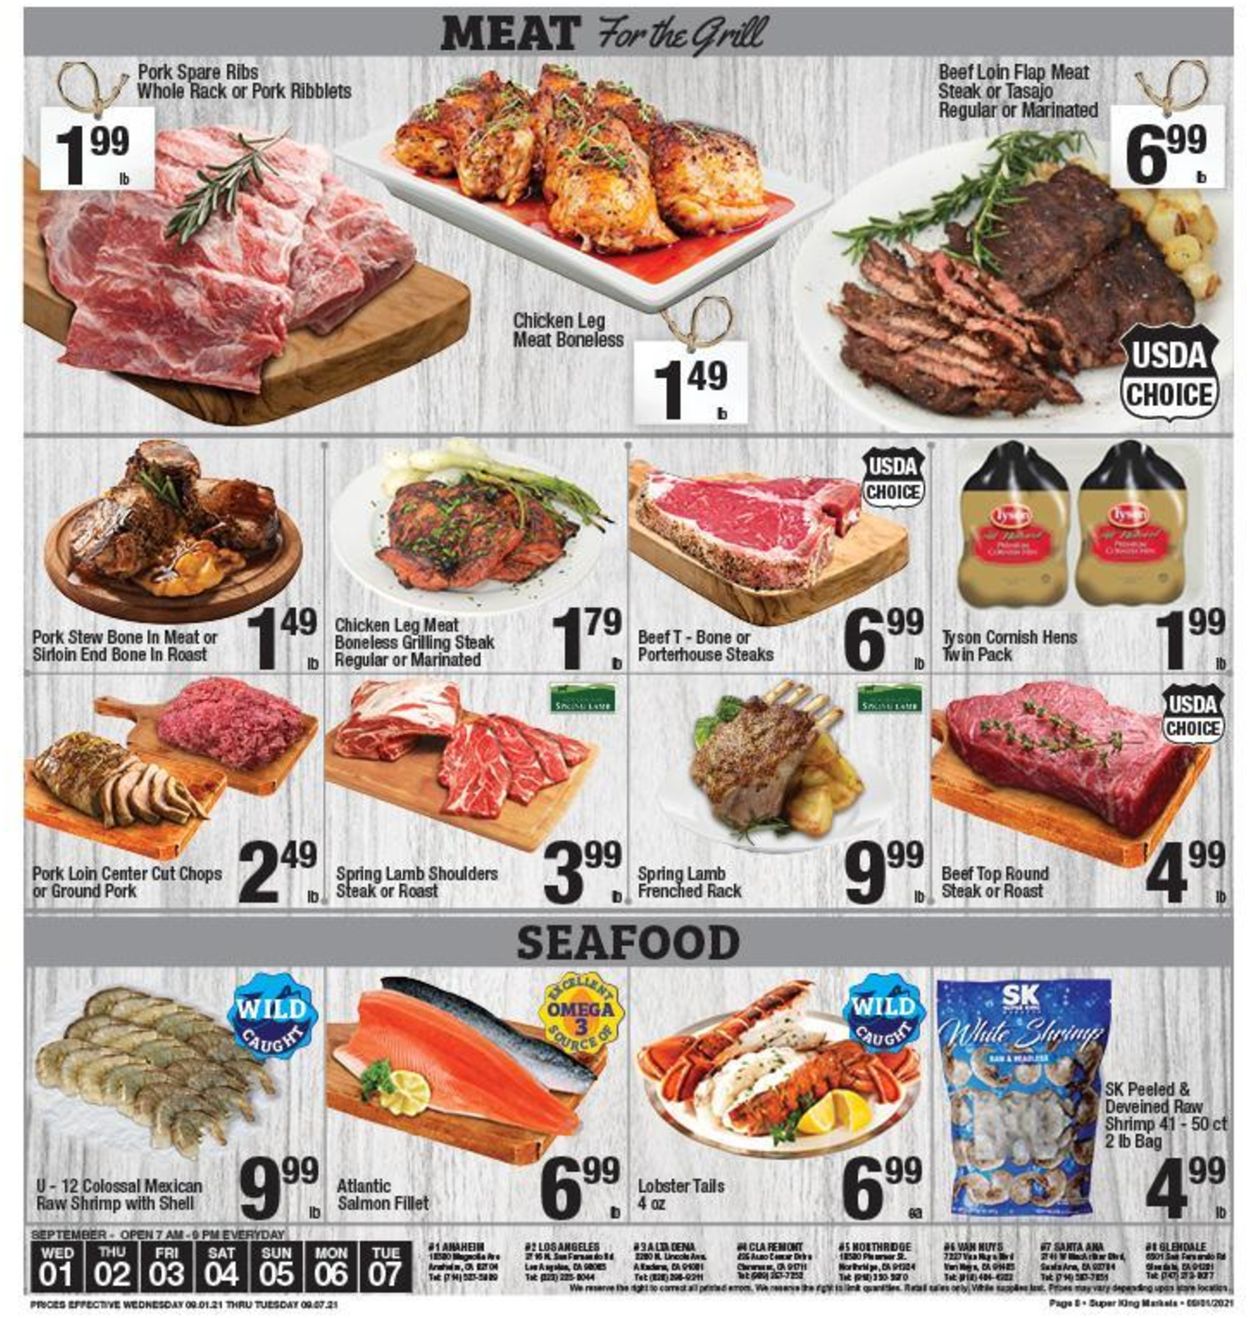 Catalogue Super King Market from 09/01/2021